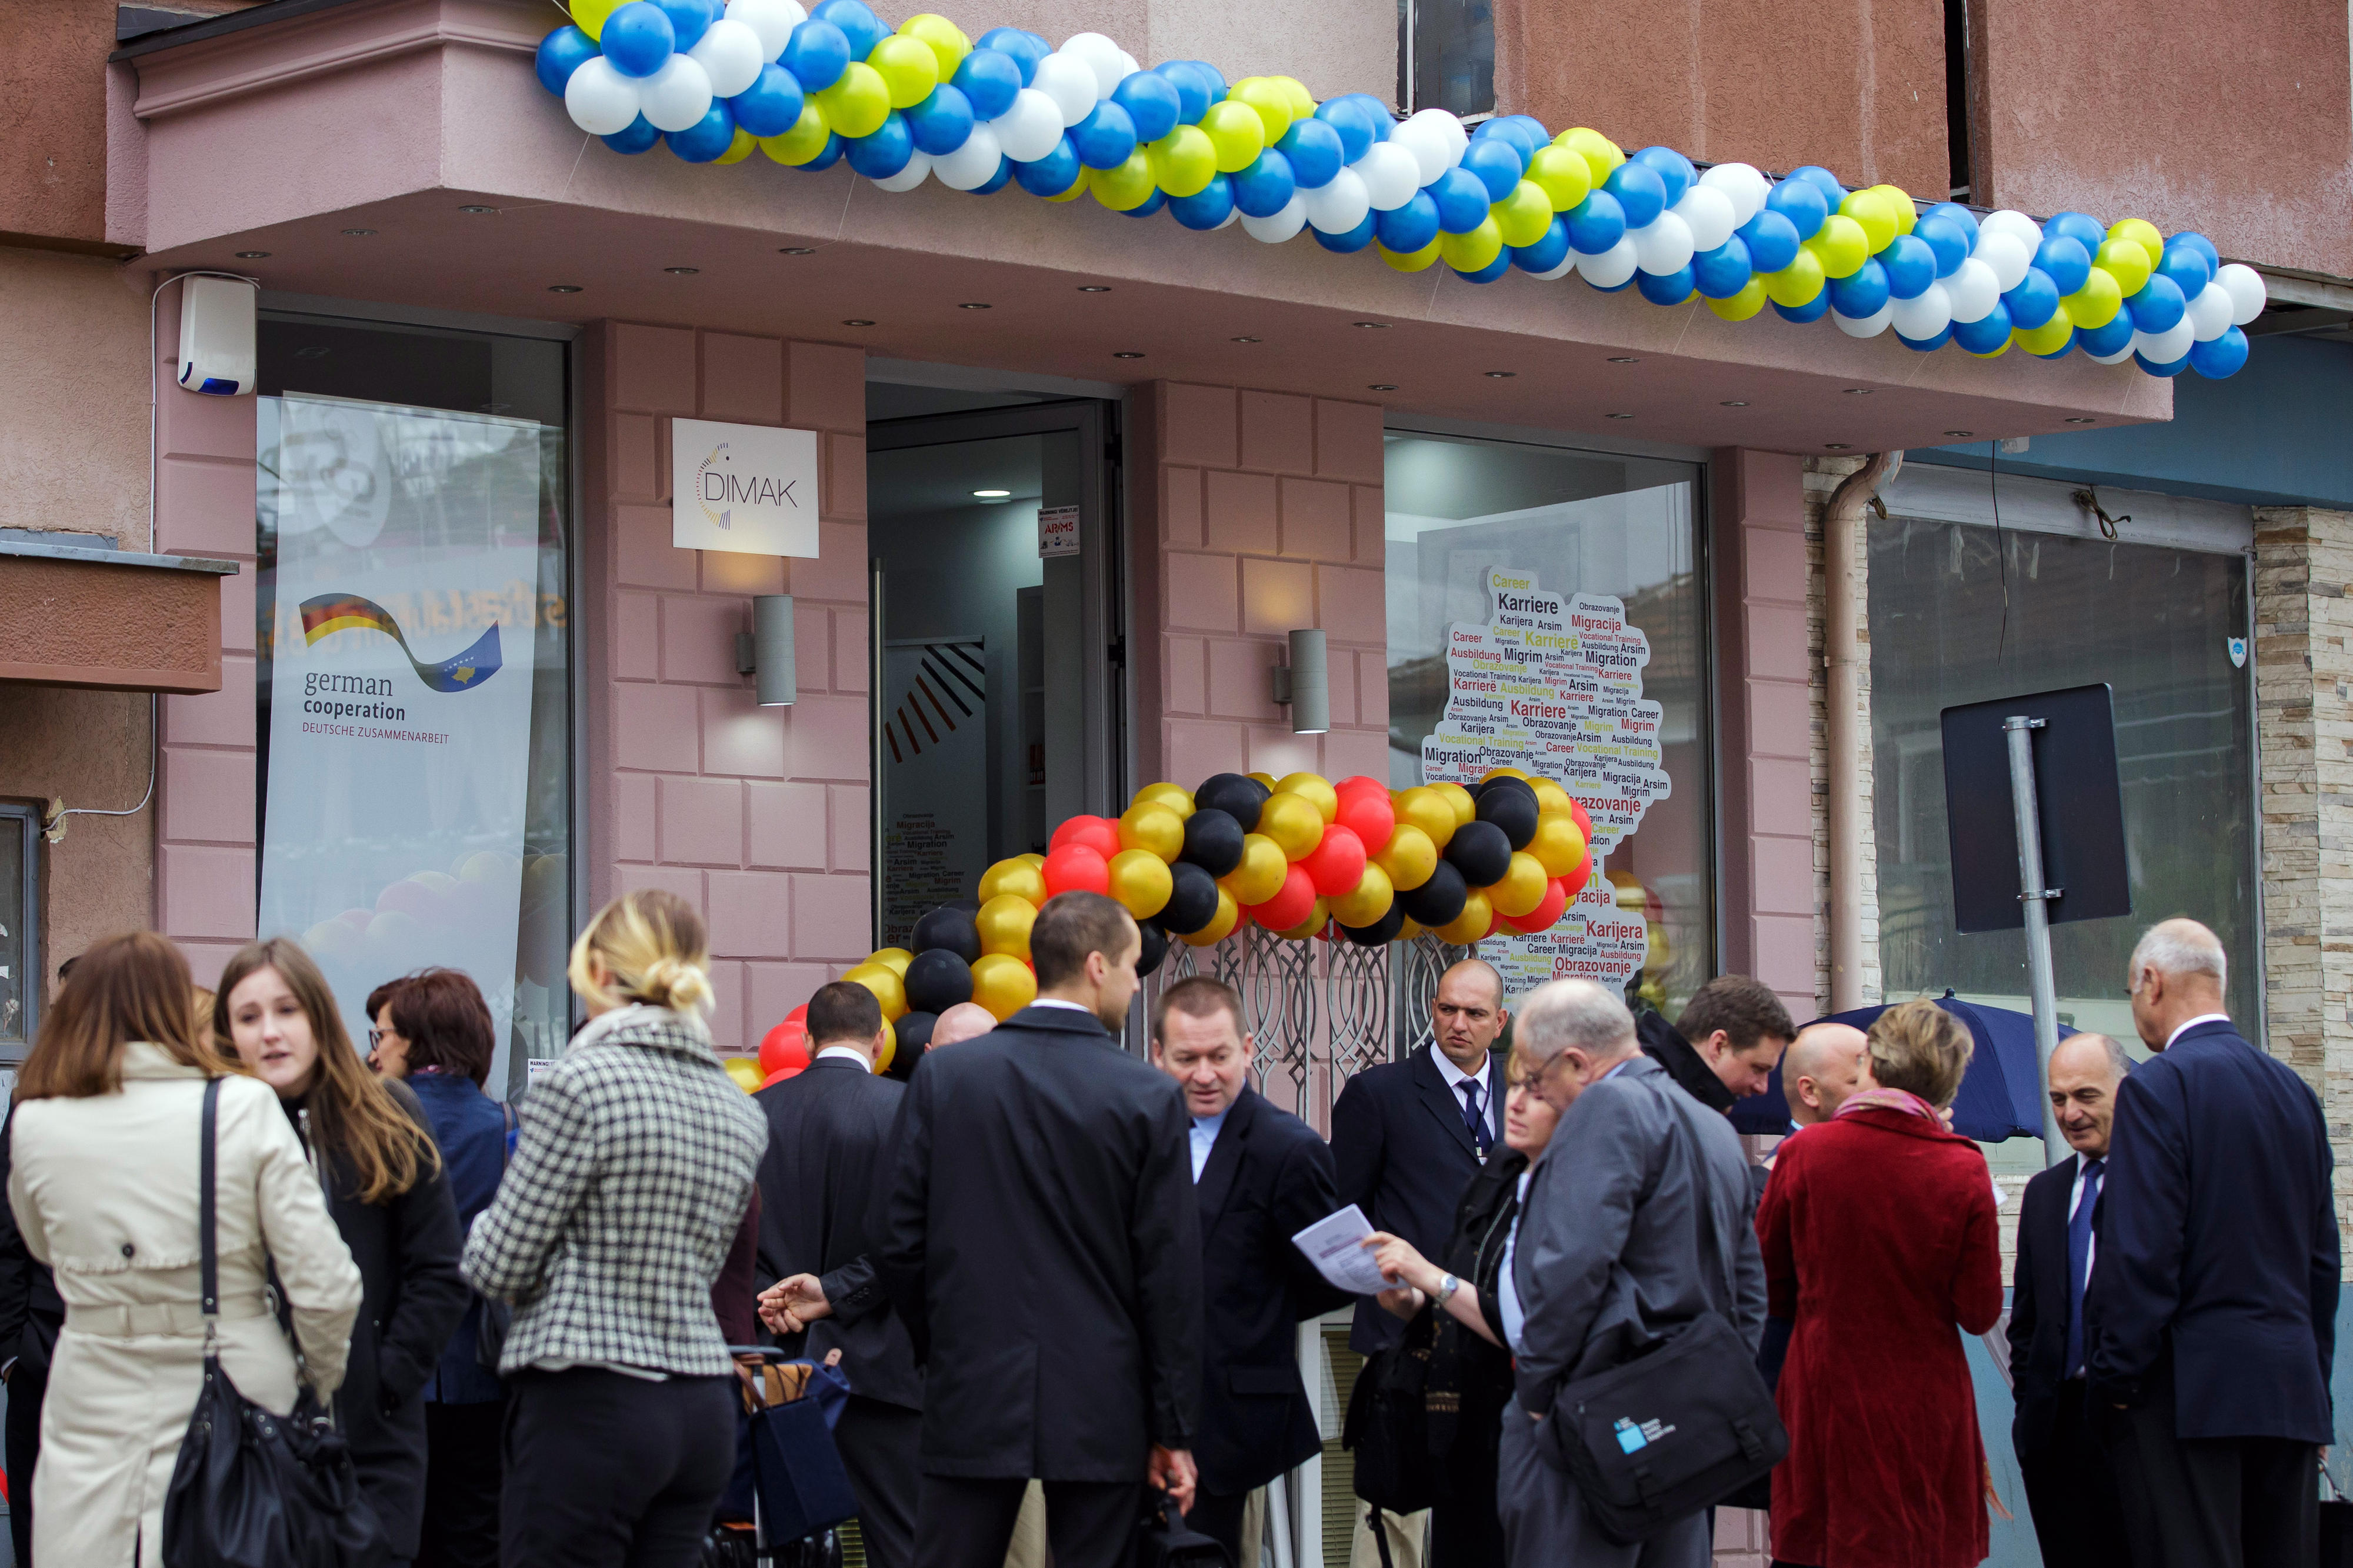 Exterior view of the German centre for jobs, migration and reintegration ( DIMAK ) on the opening day in Pristina, 28.05.2015